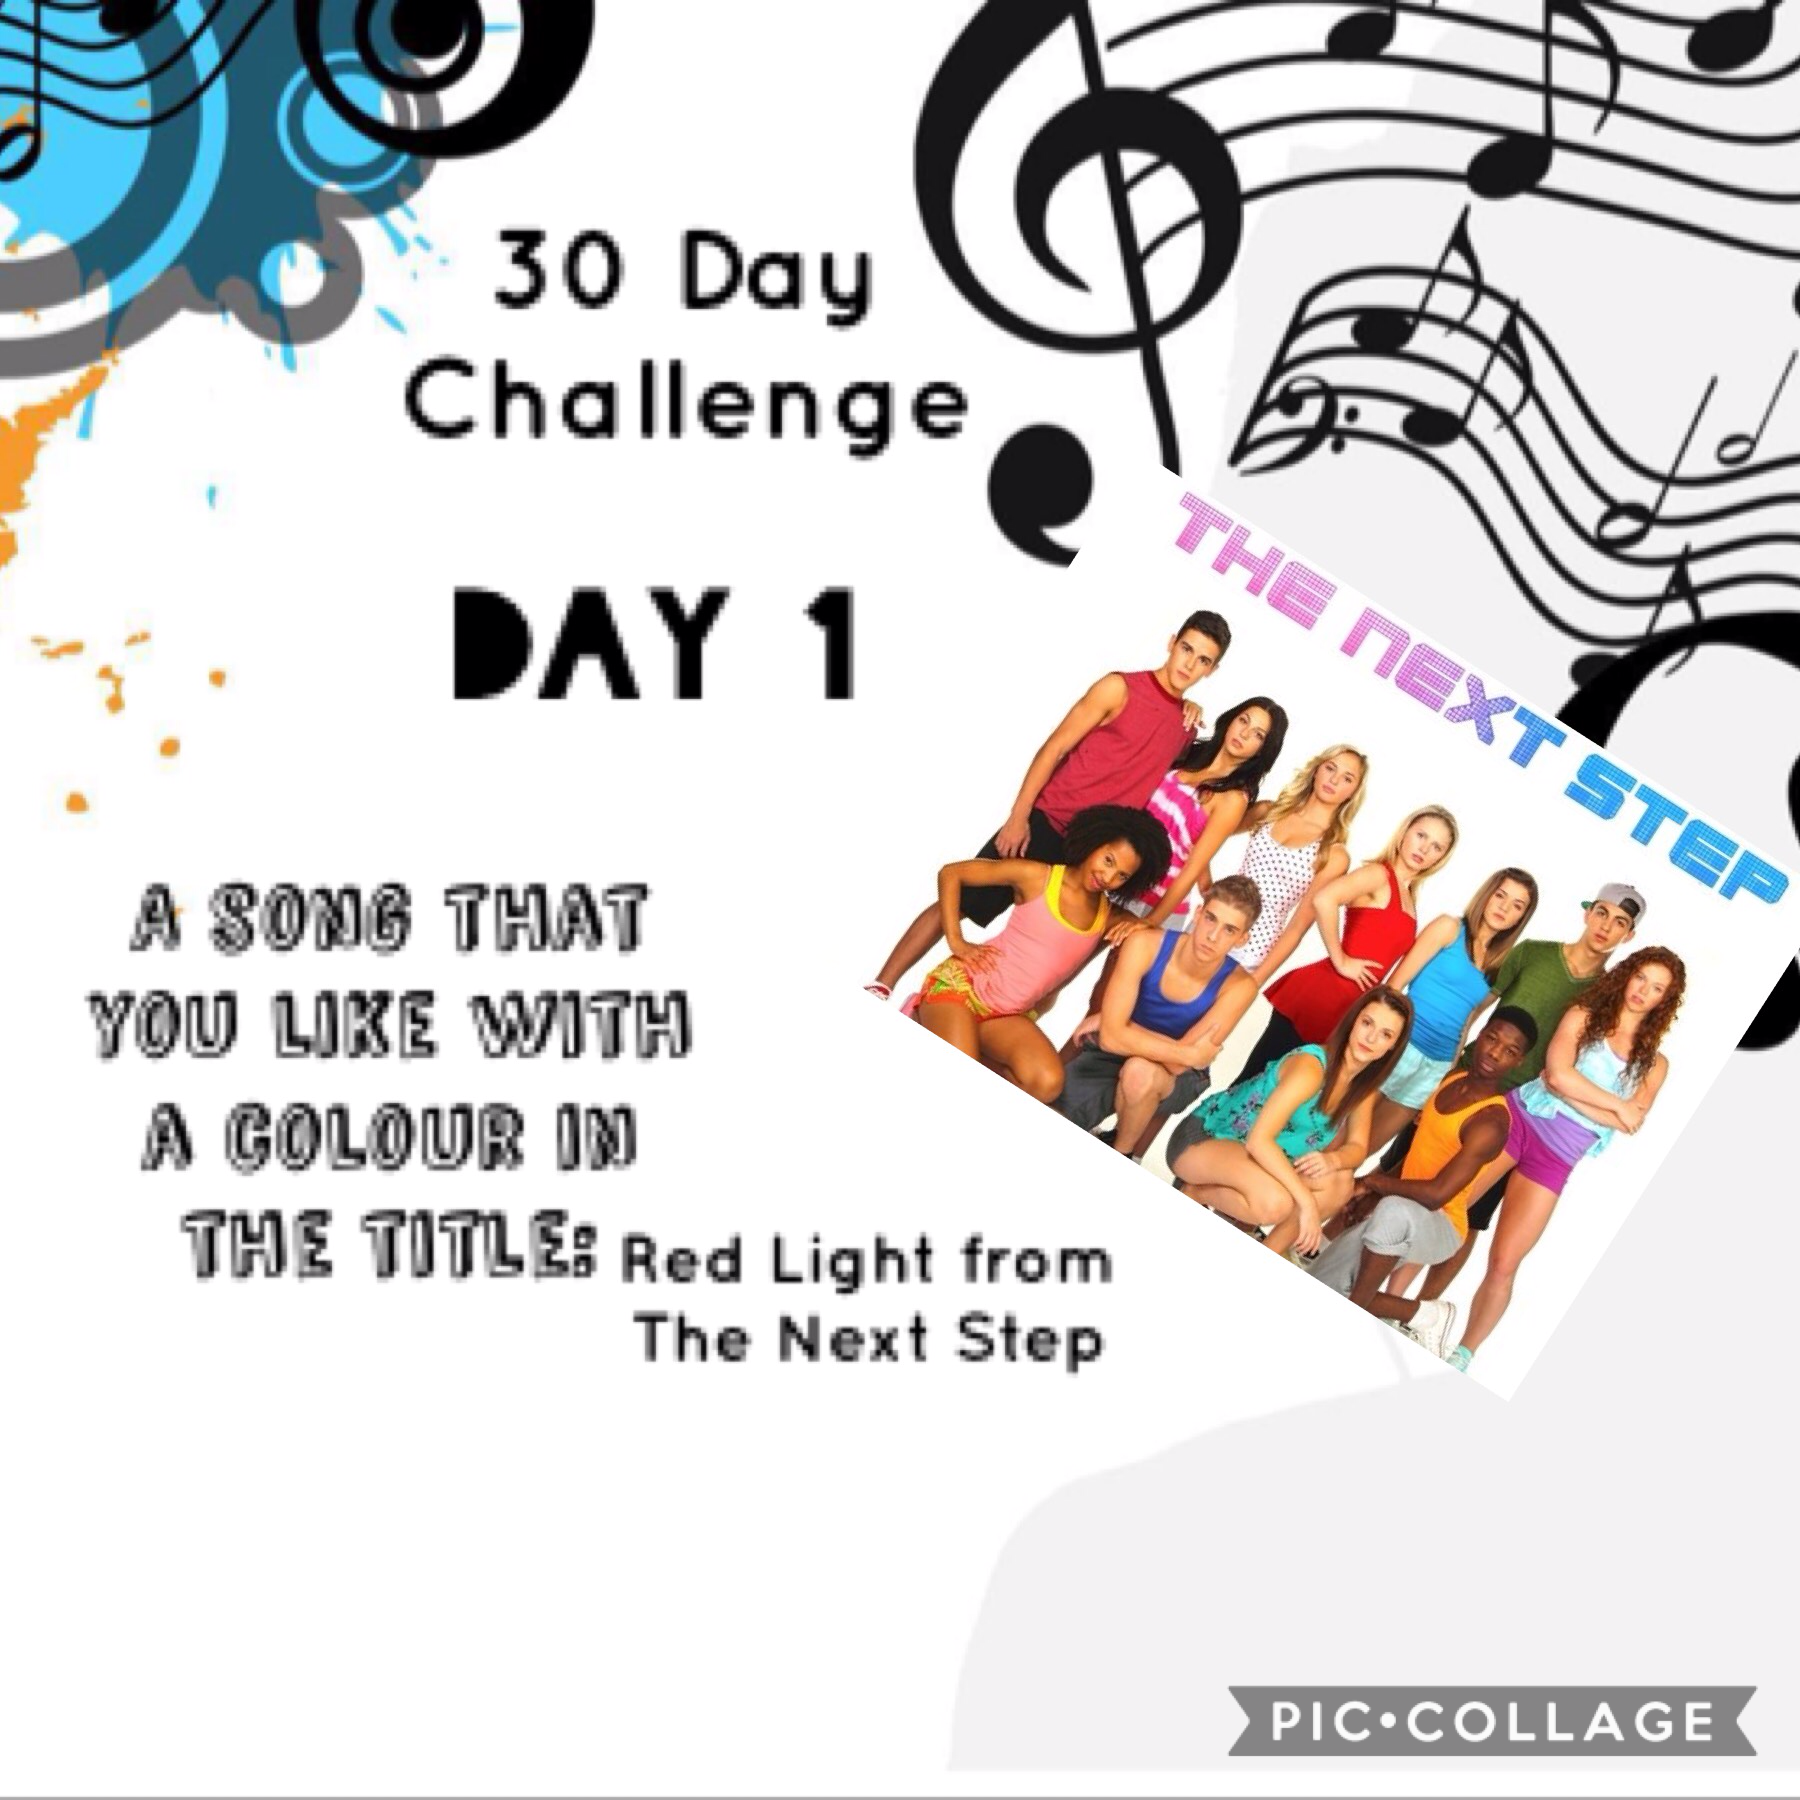 30 Day Challenge Day 1